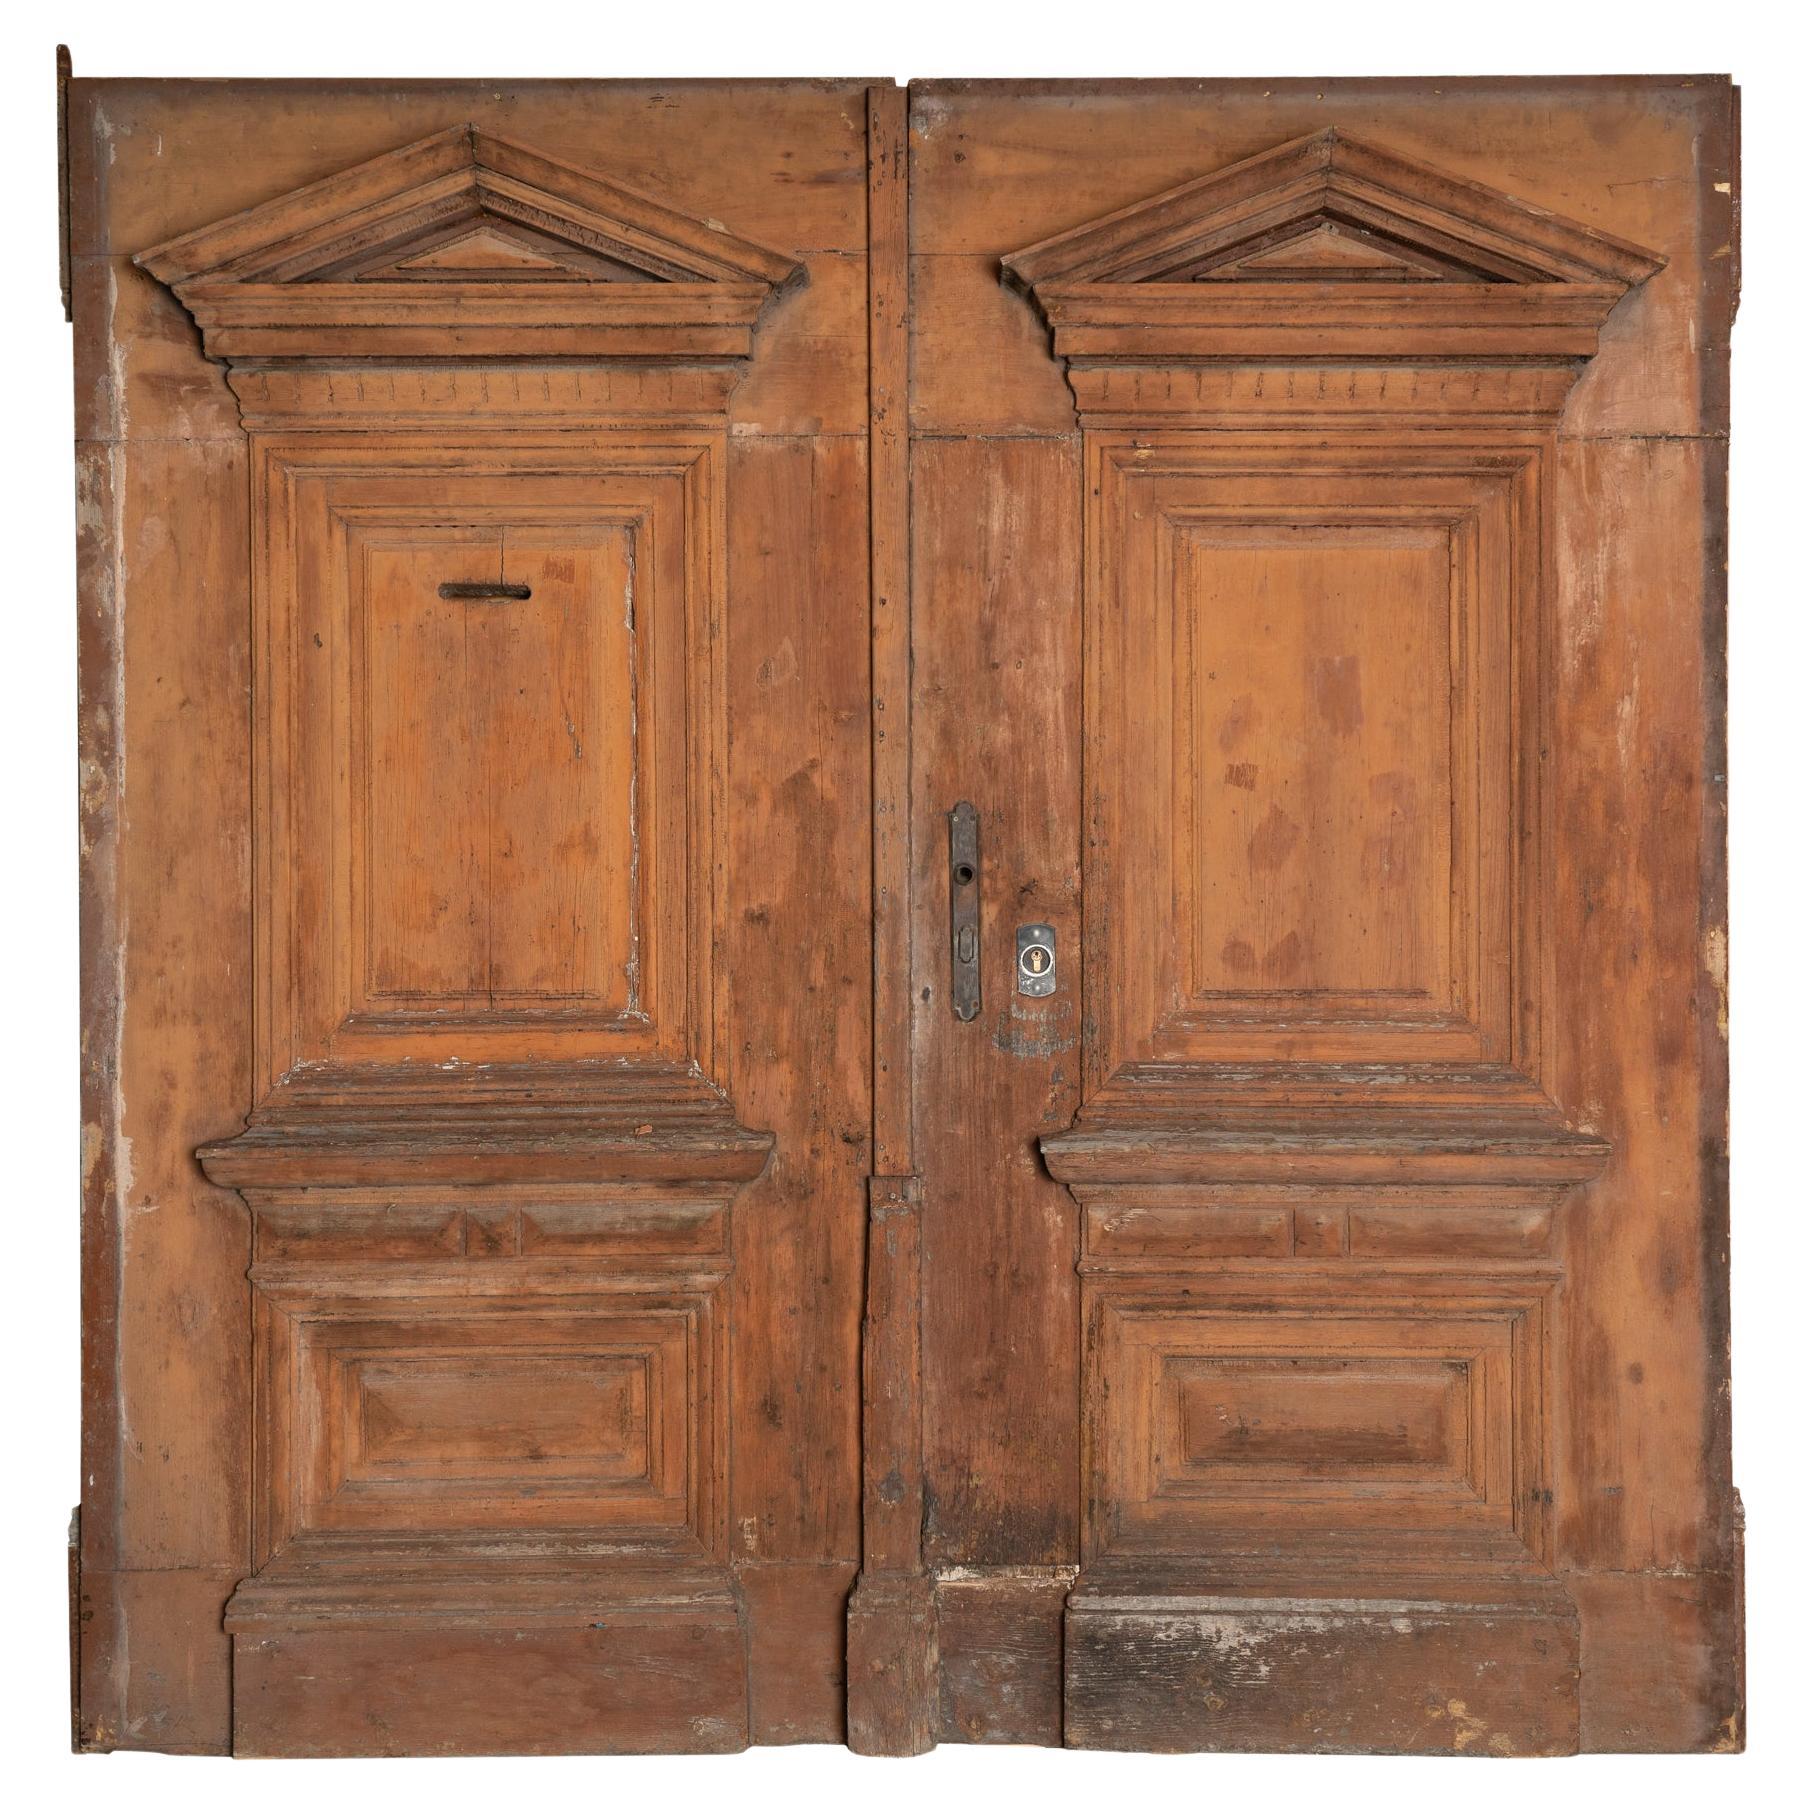 Huge Architectural Salvaged Doors With Arched Transom, Hungary circa 1840-60